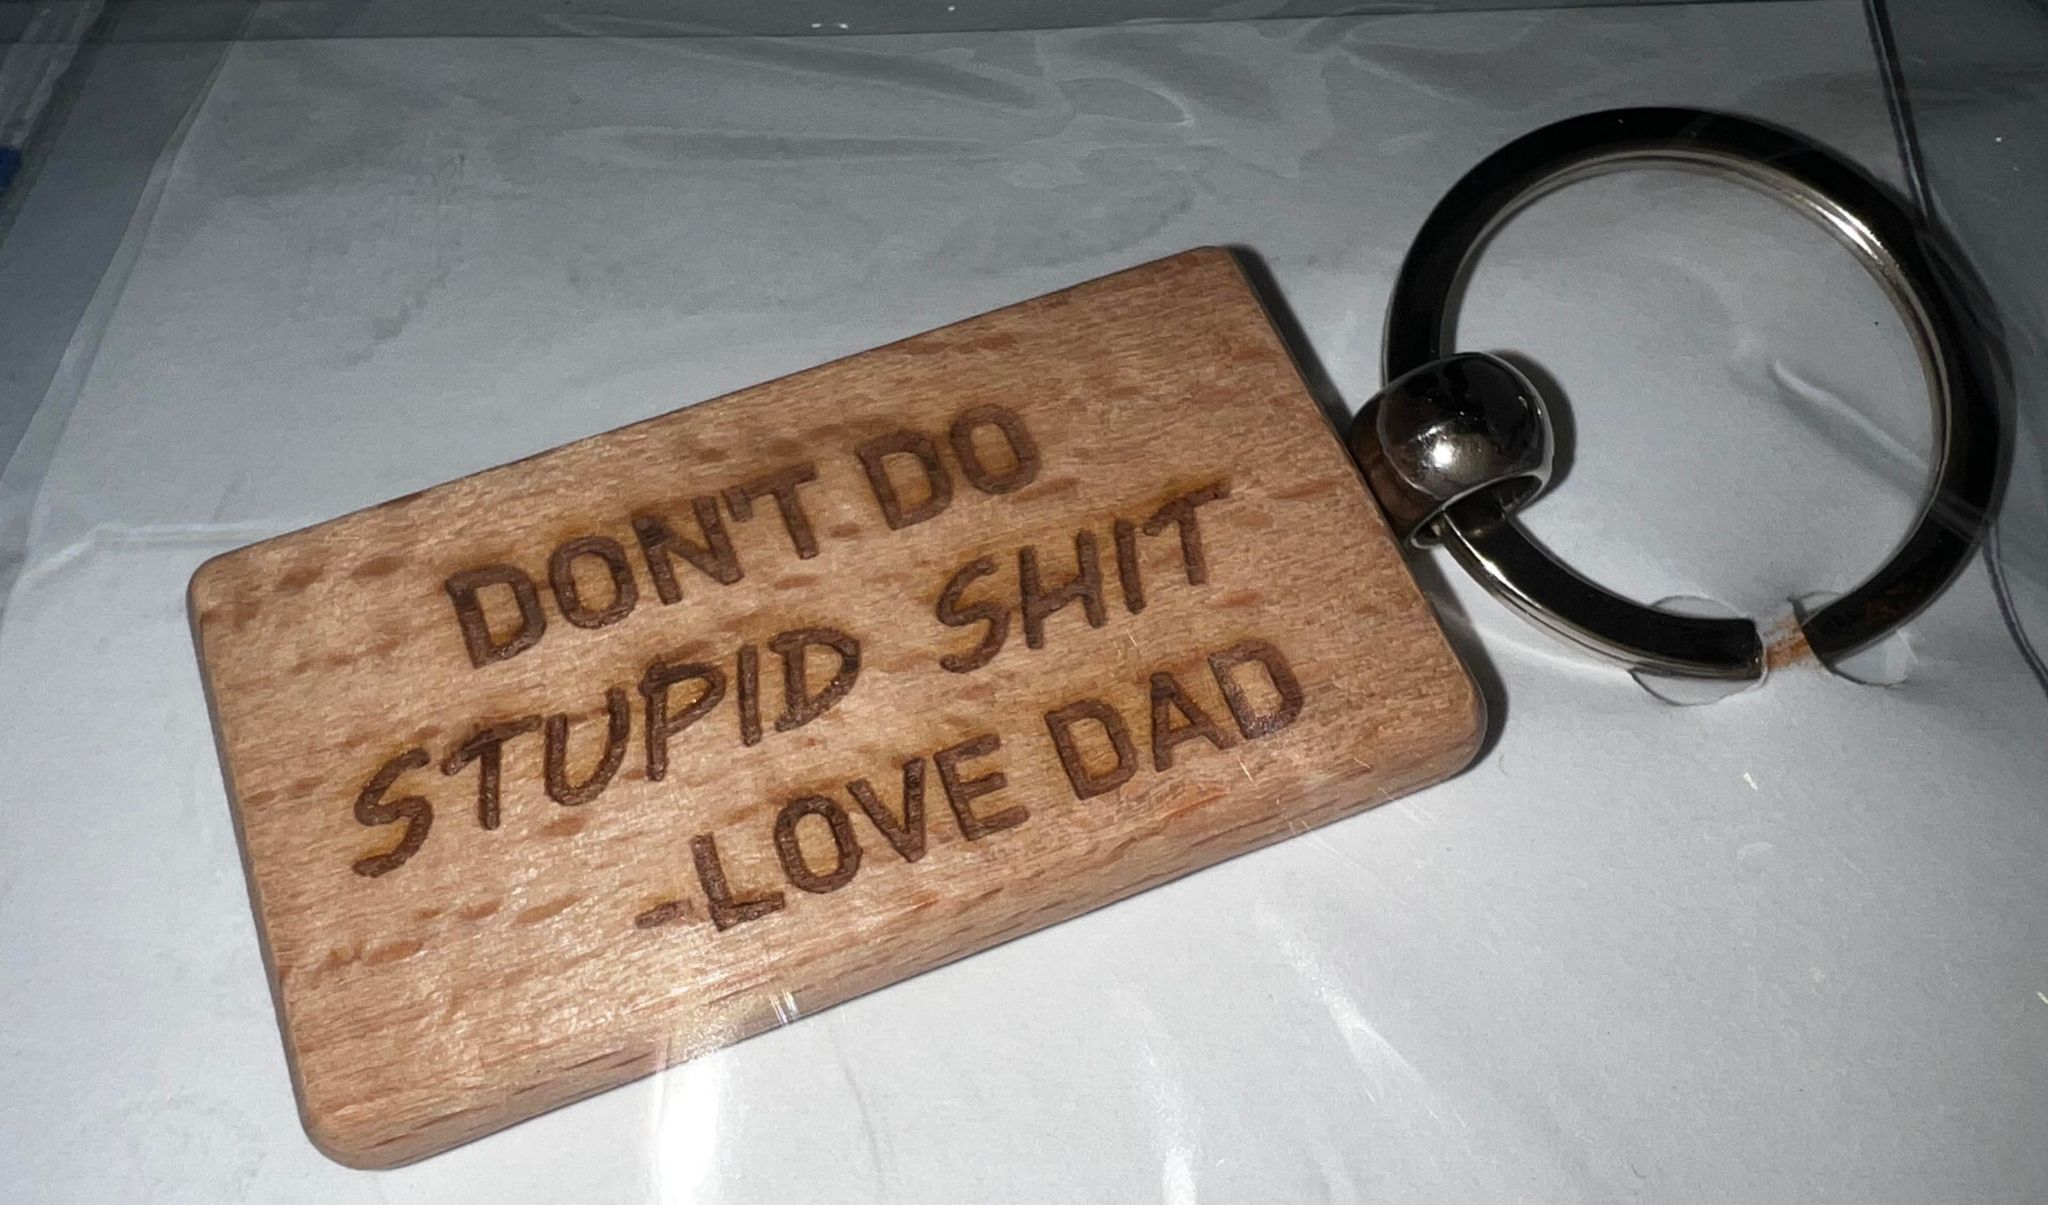 DON'T DO STUPID SHIT -LOVE DAD KEYCHAIN – Tokis Tees and Custom Designs